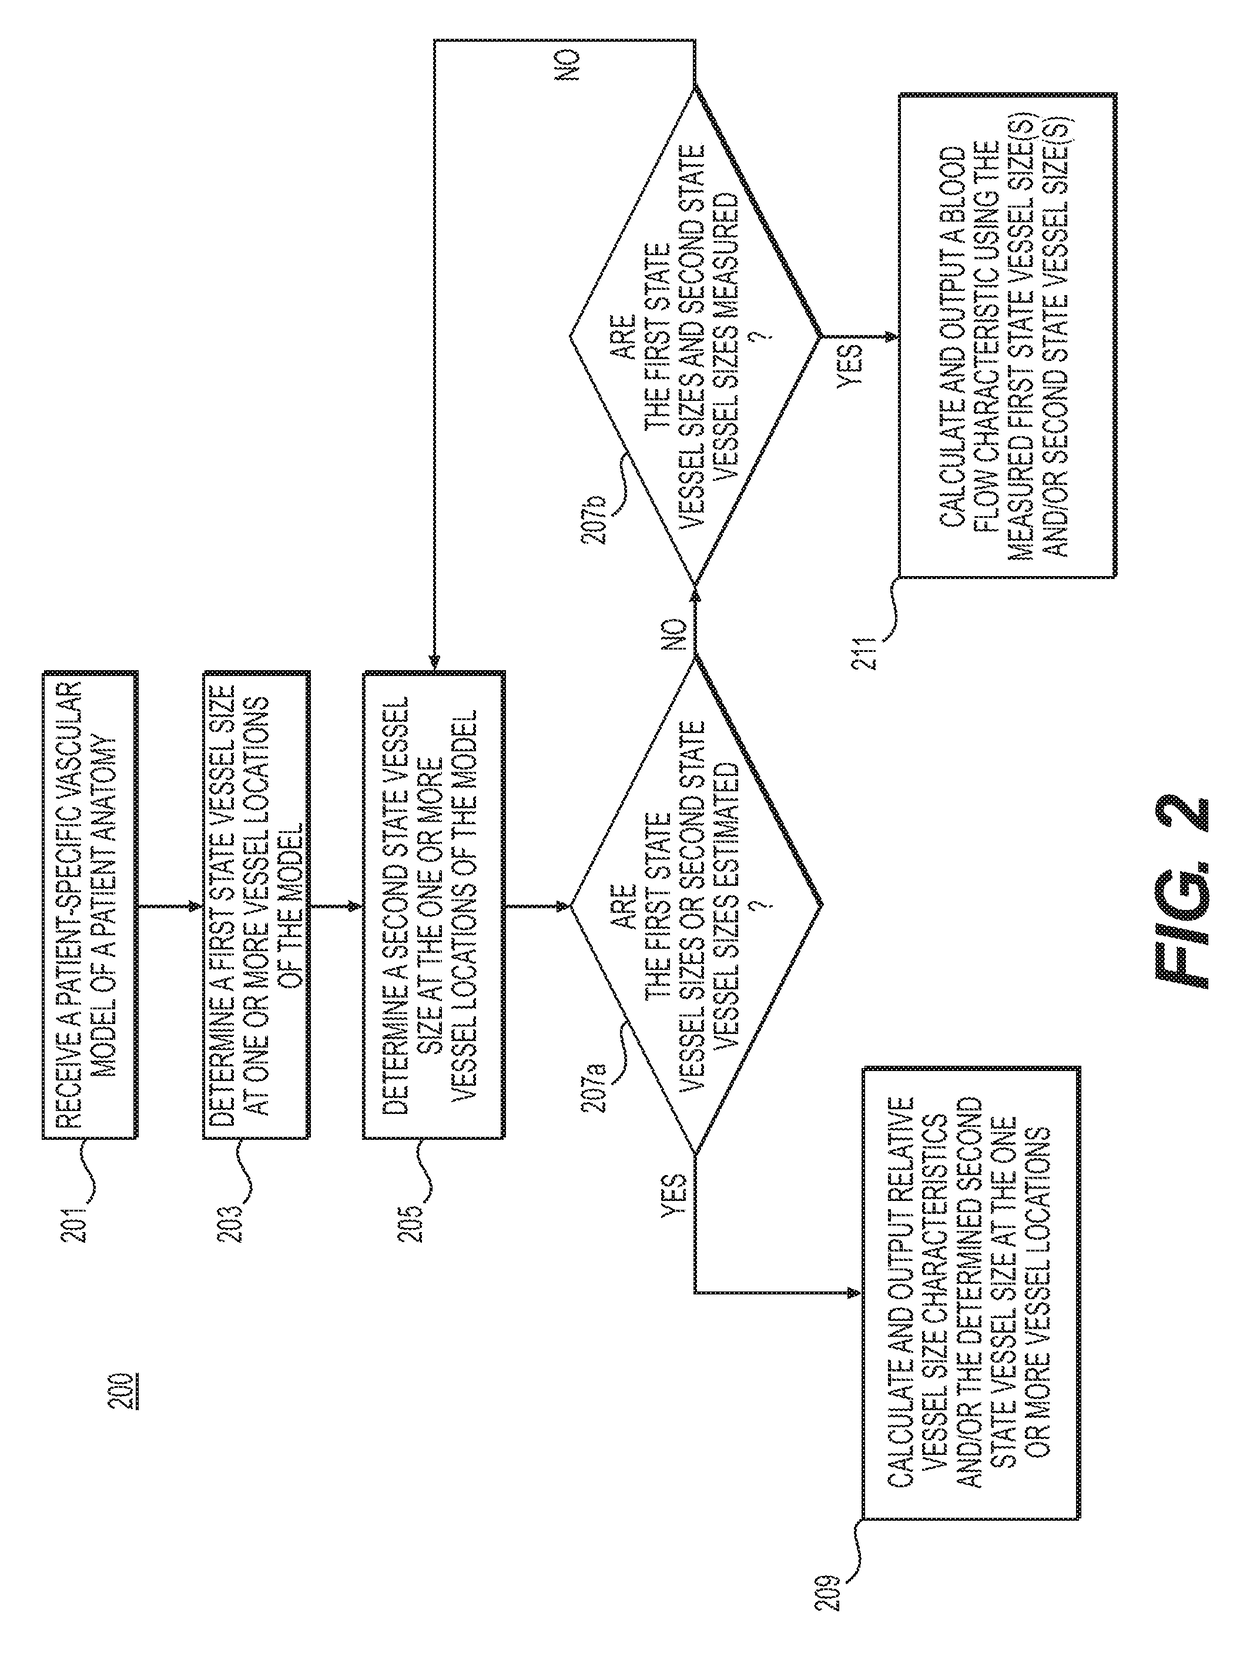 Systems and methods for vessel reactivity to guide diagnosis or treatment of cardiovascular disease